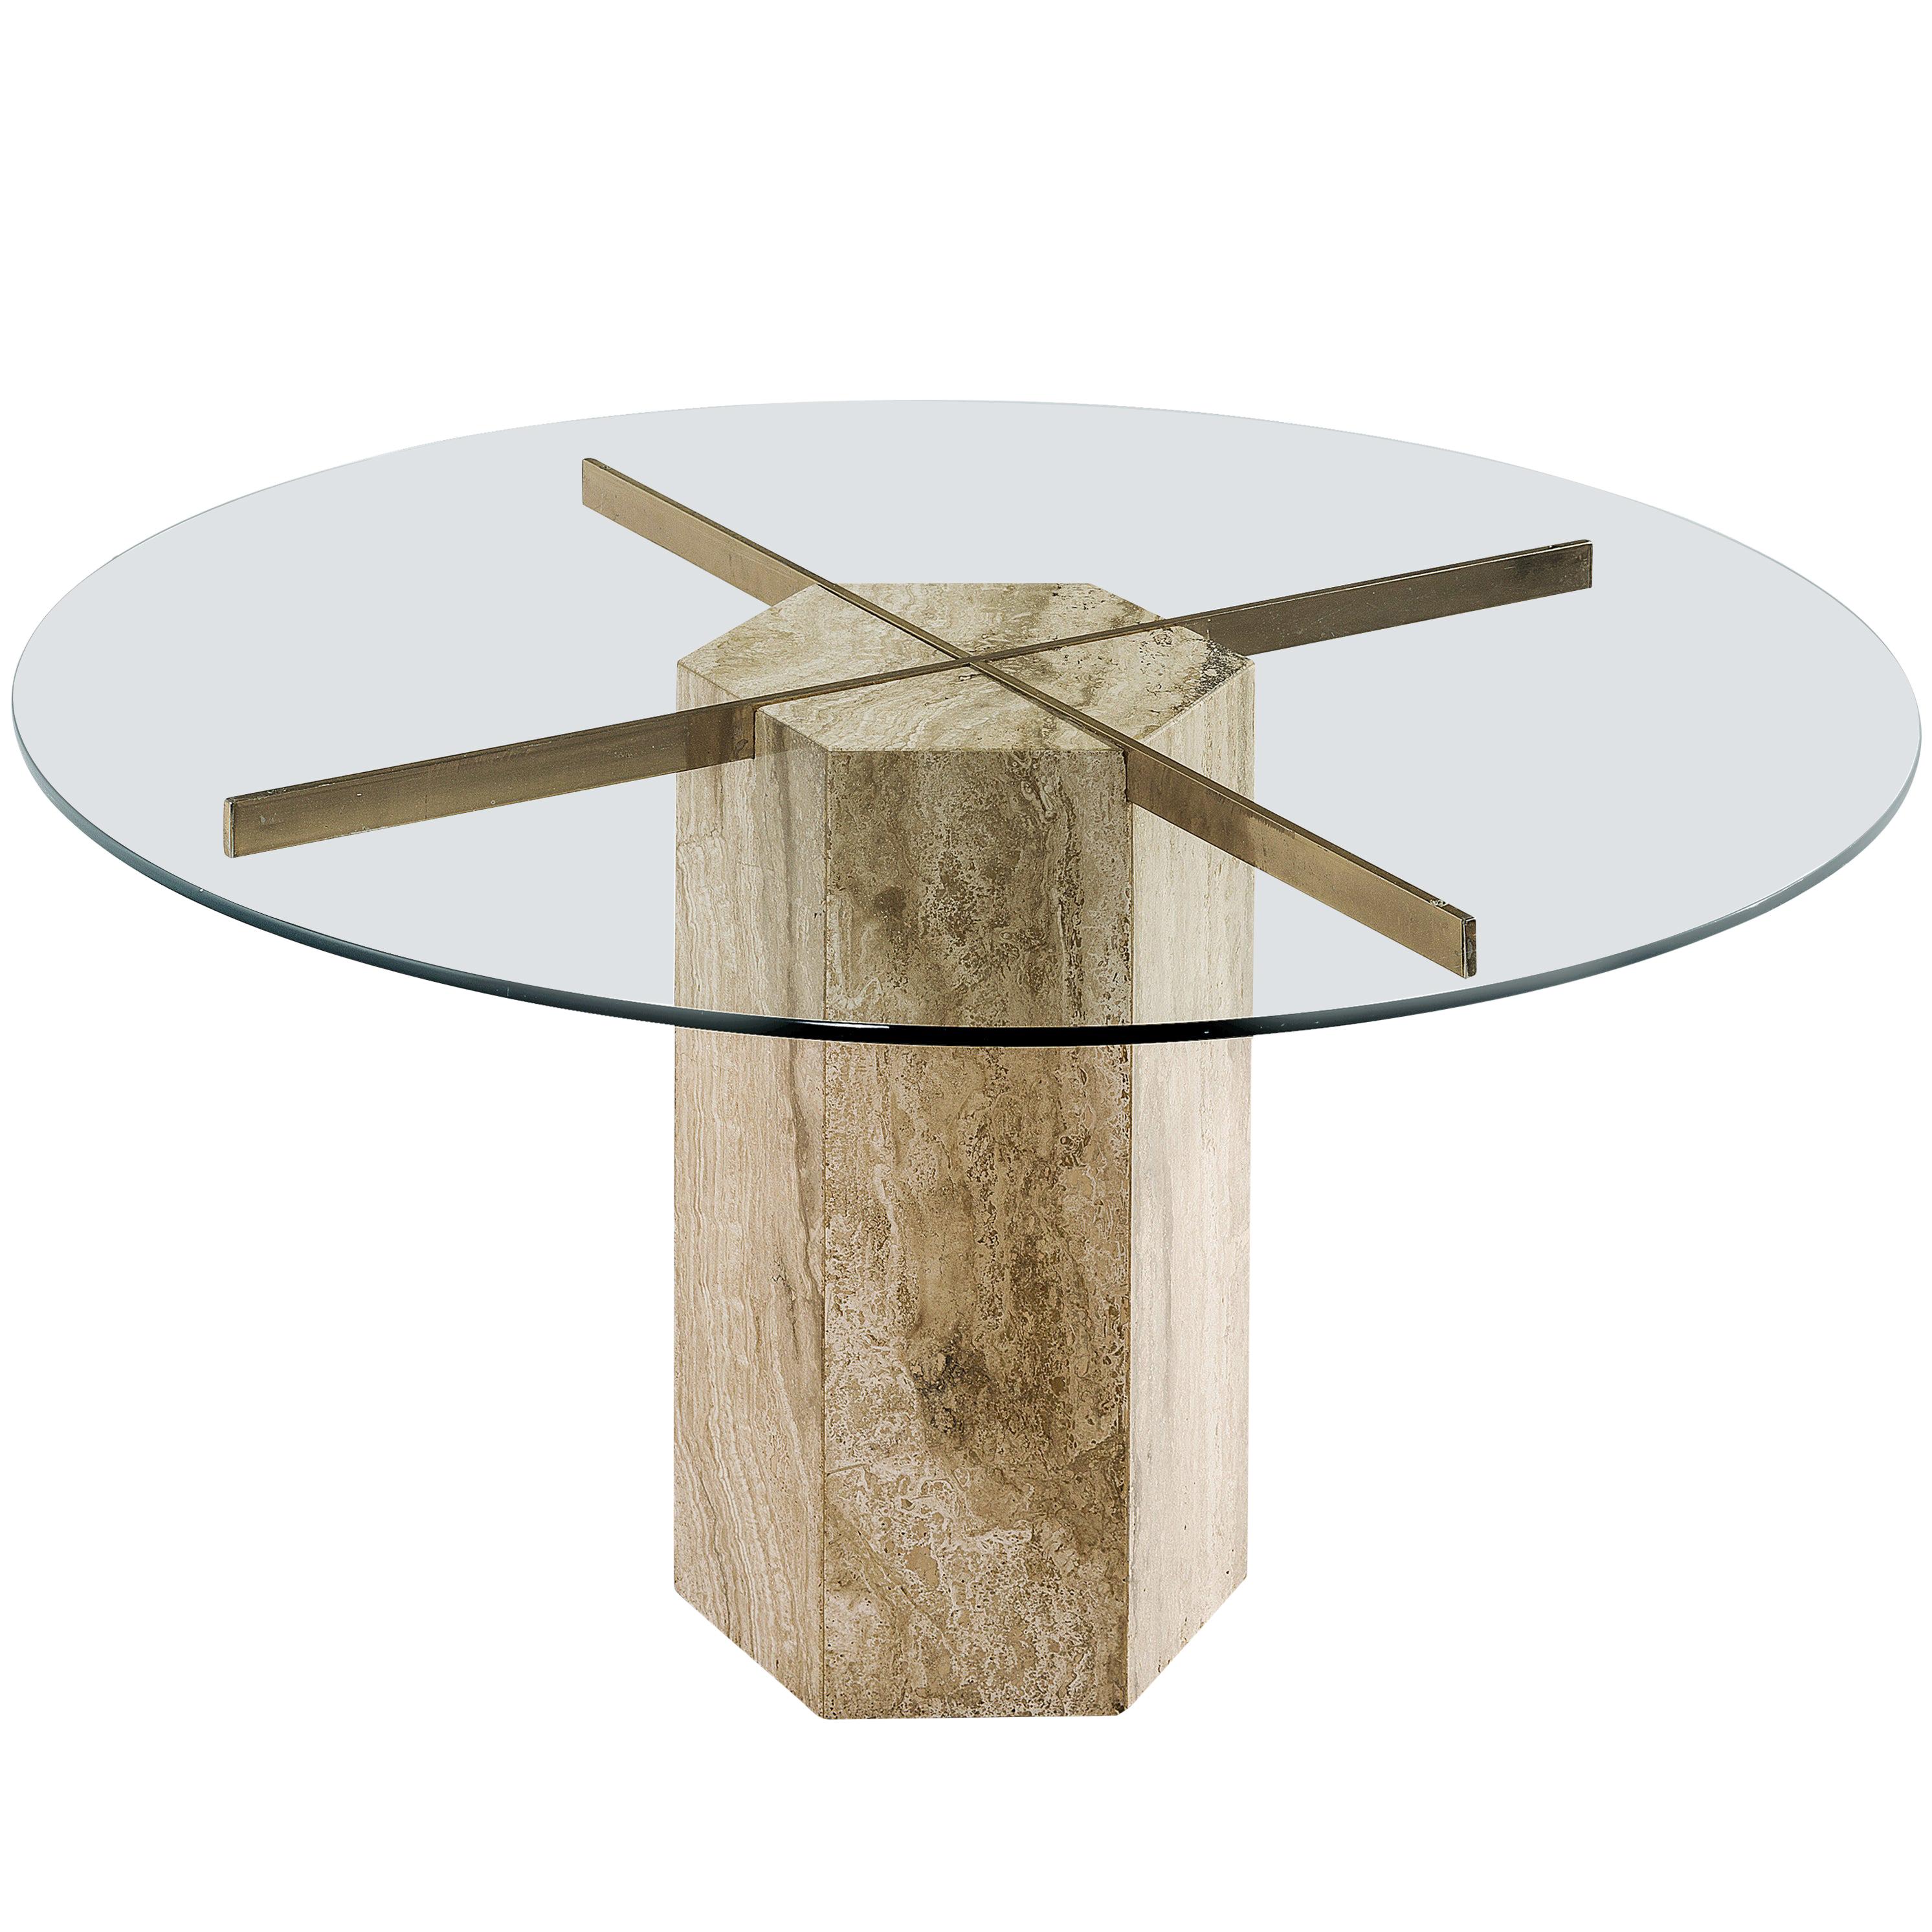 Round Italian Dining Table in Travertine, Brass and Glass